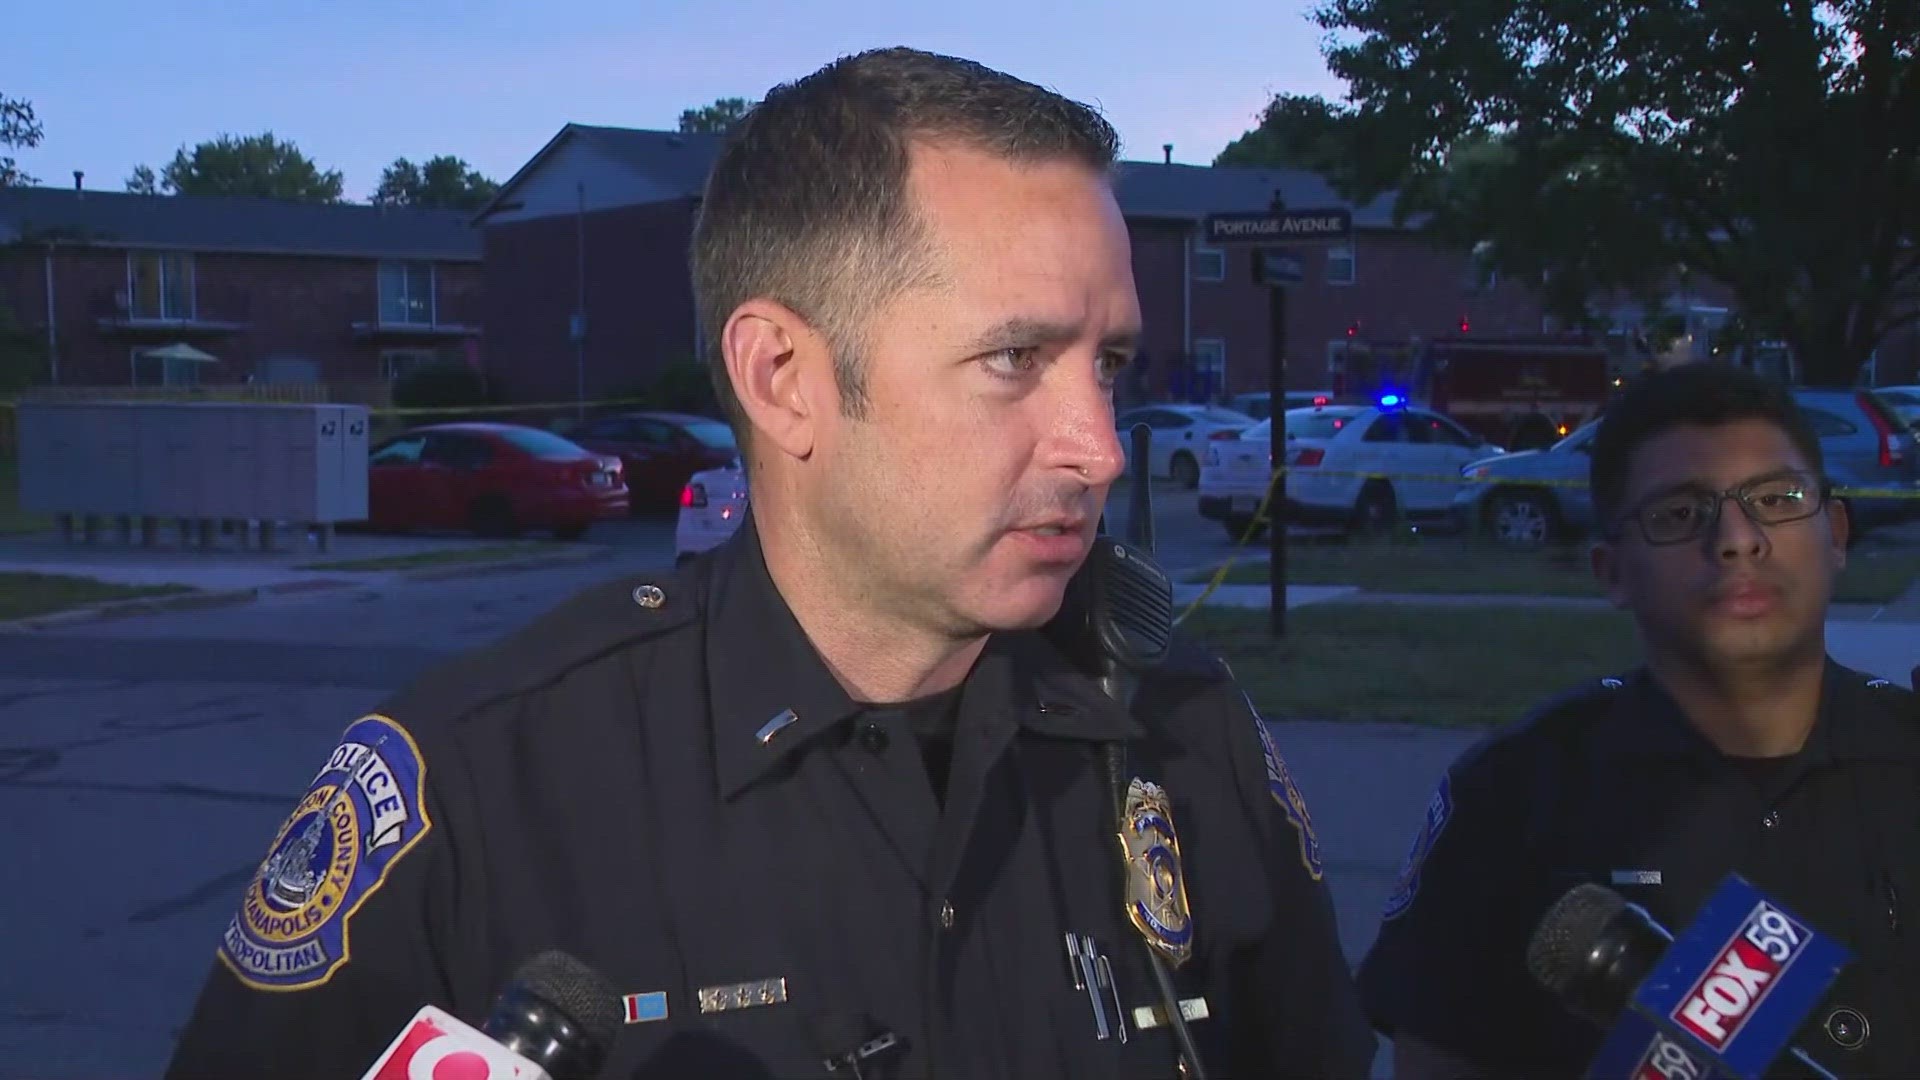 IMPD shares an update after police shot a suspect during a chase Tuesday morning near Madison Avenue and East Stop 10 Road.